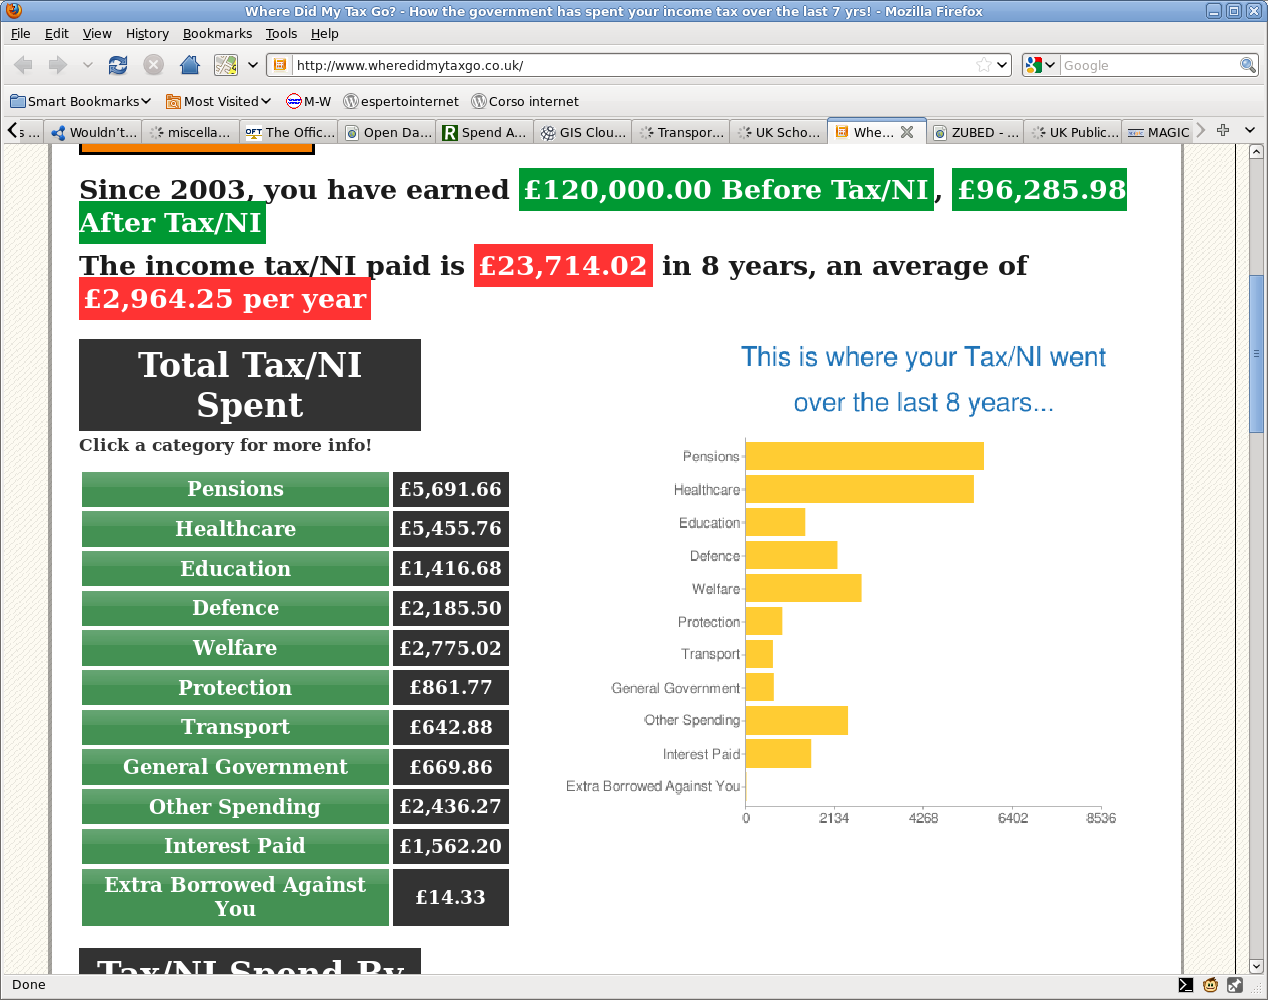 Open Data about Budgets and taxes /img/wheretaxgoresult.png